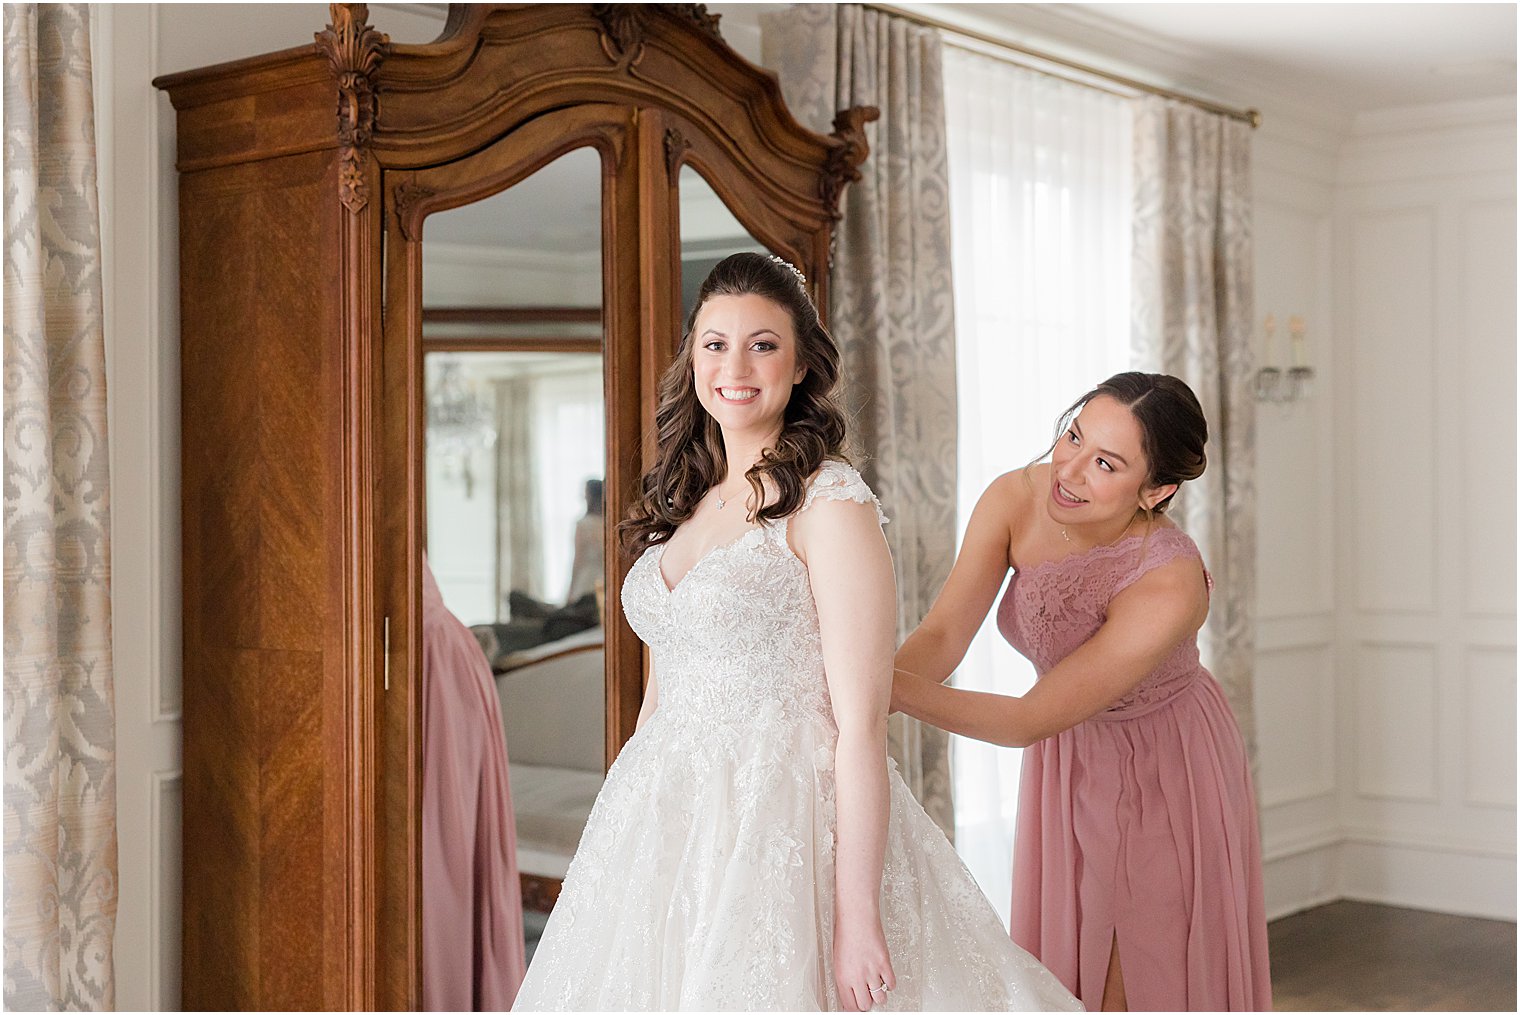 bridesmaid in pink gown helps bride into wedding dress